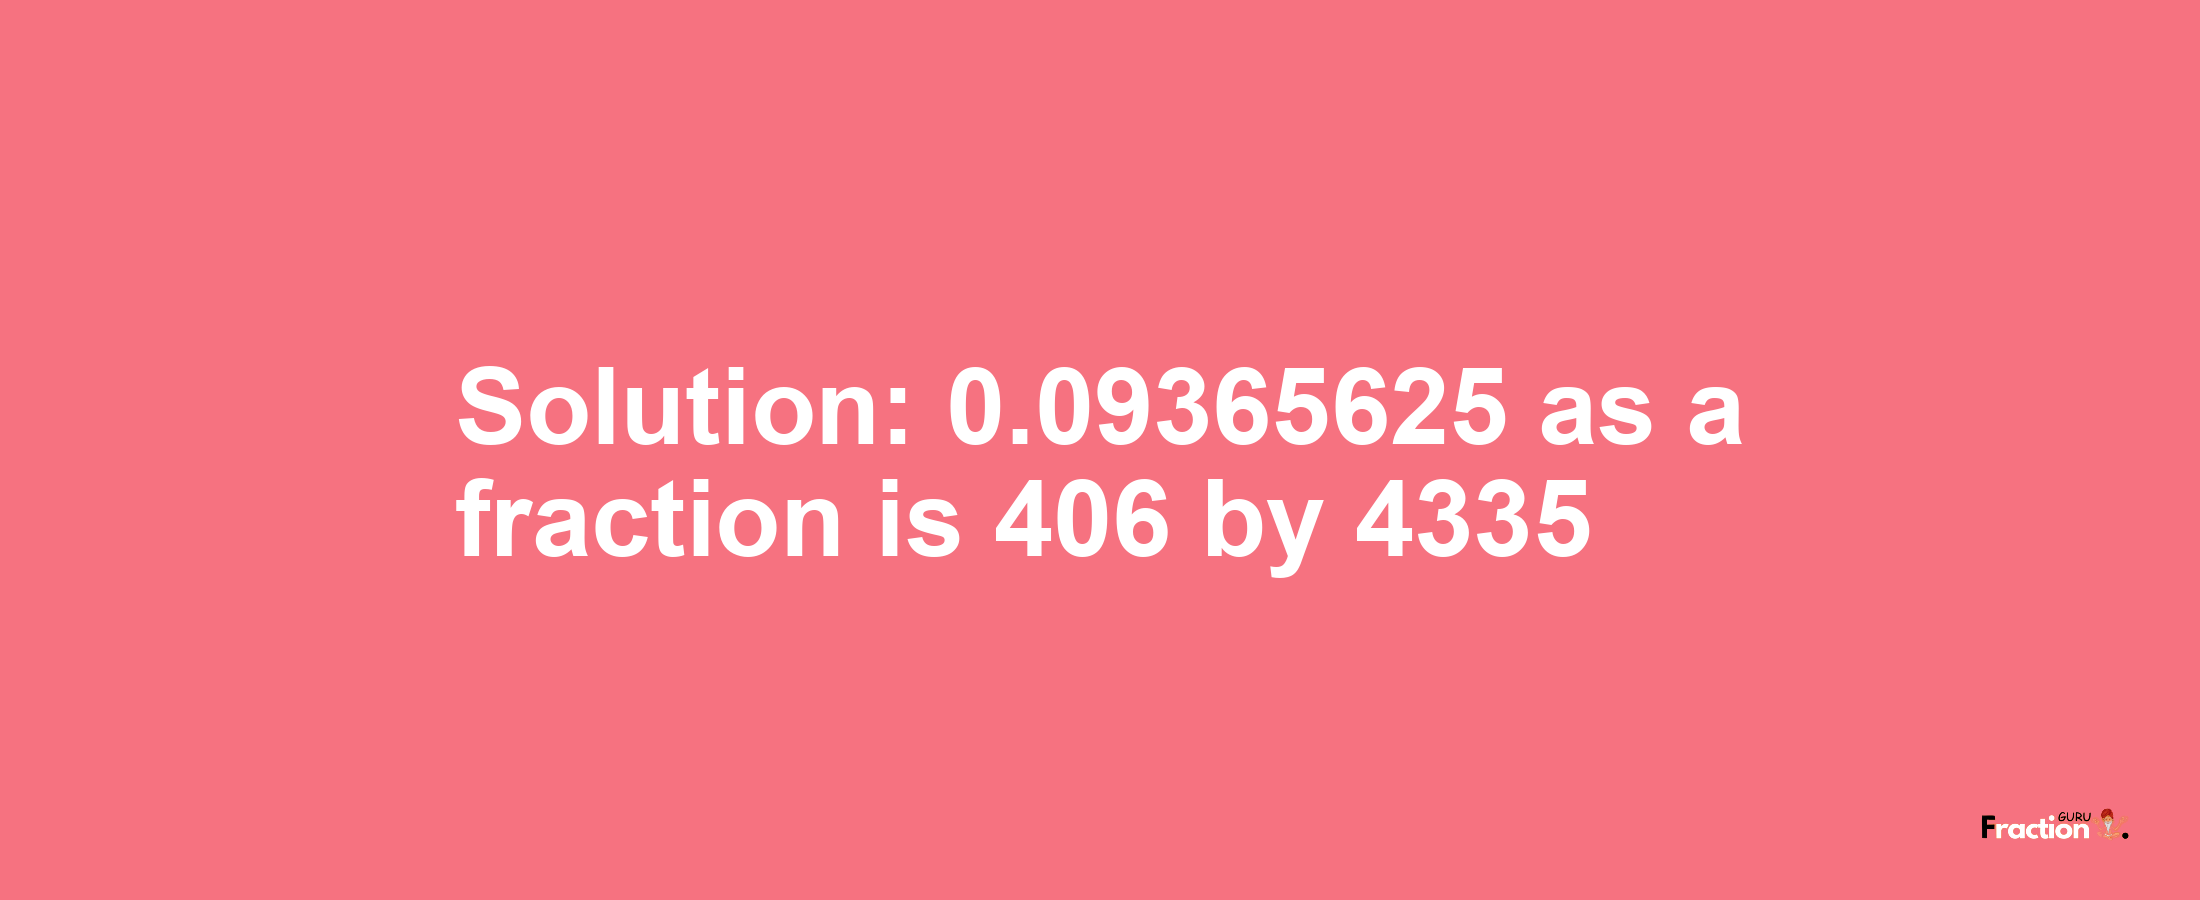 Solution:0.09365625 as a fraction is 406/4335